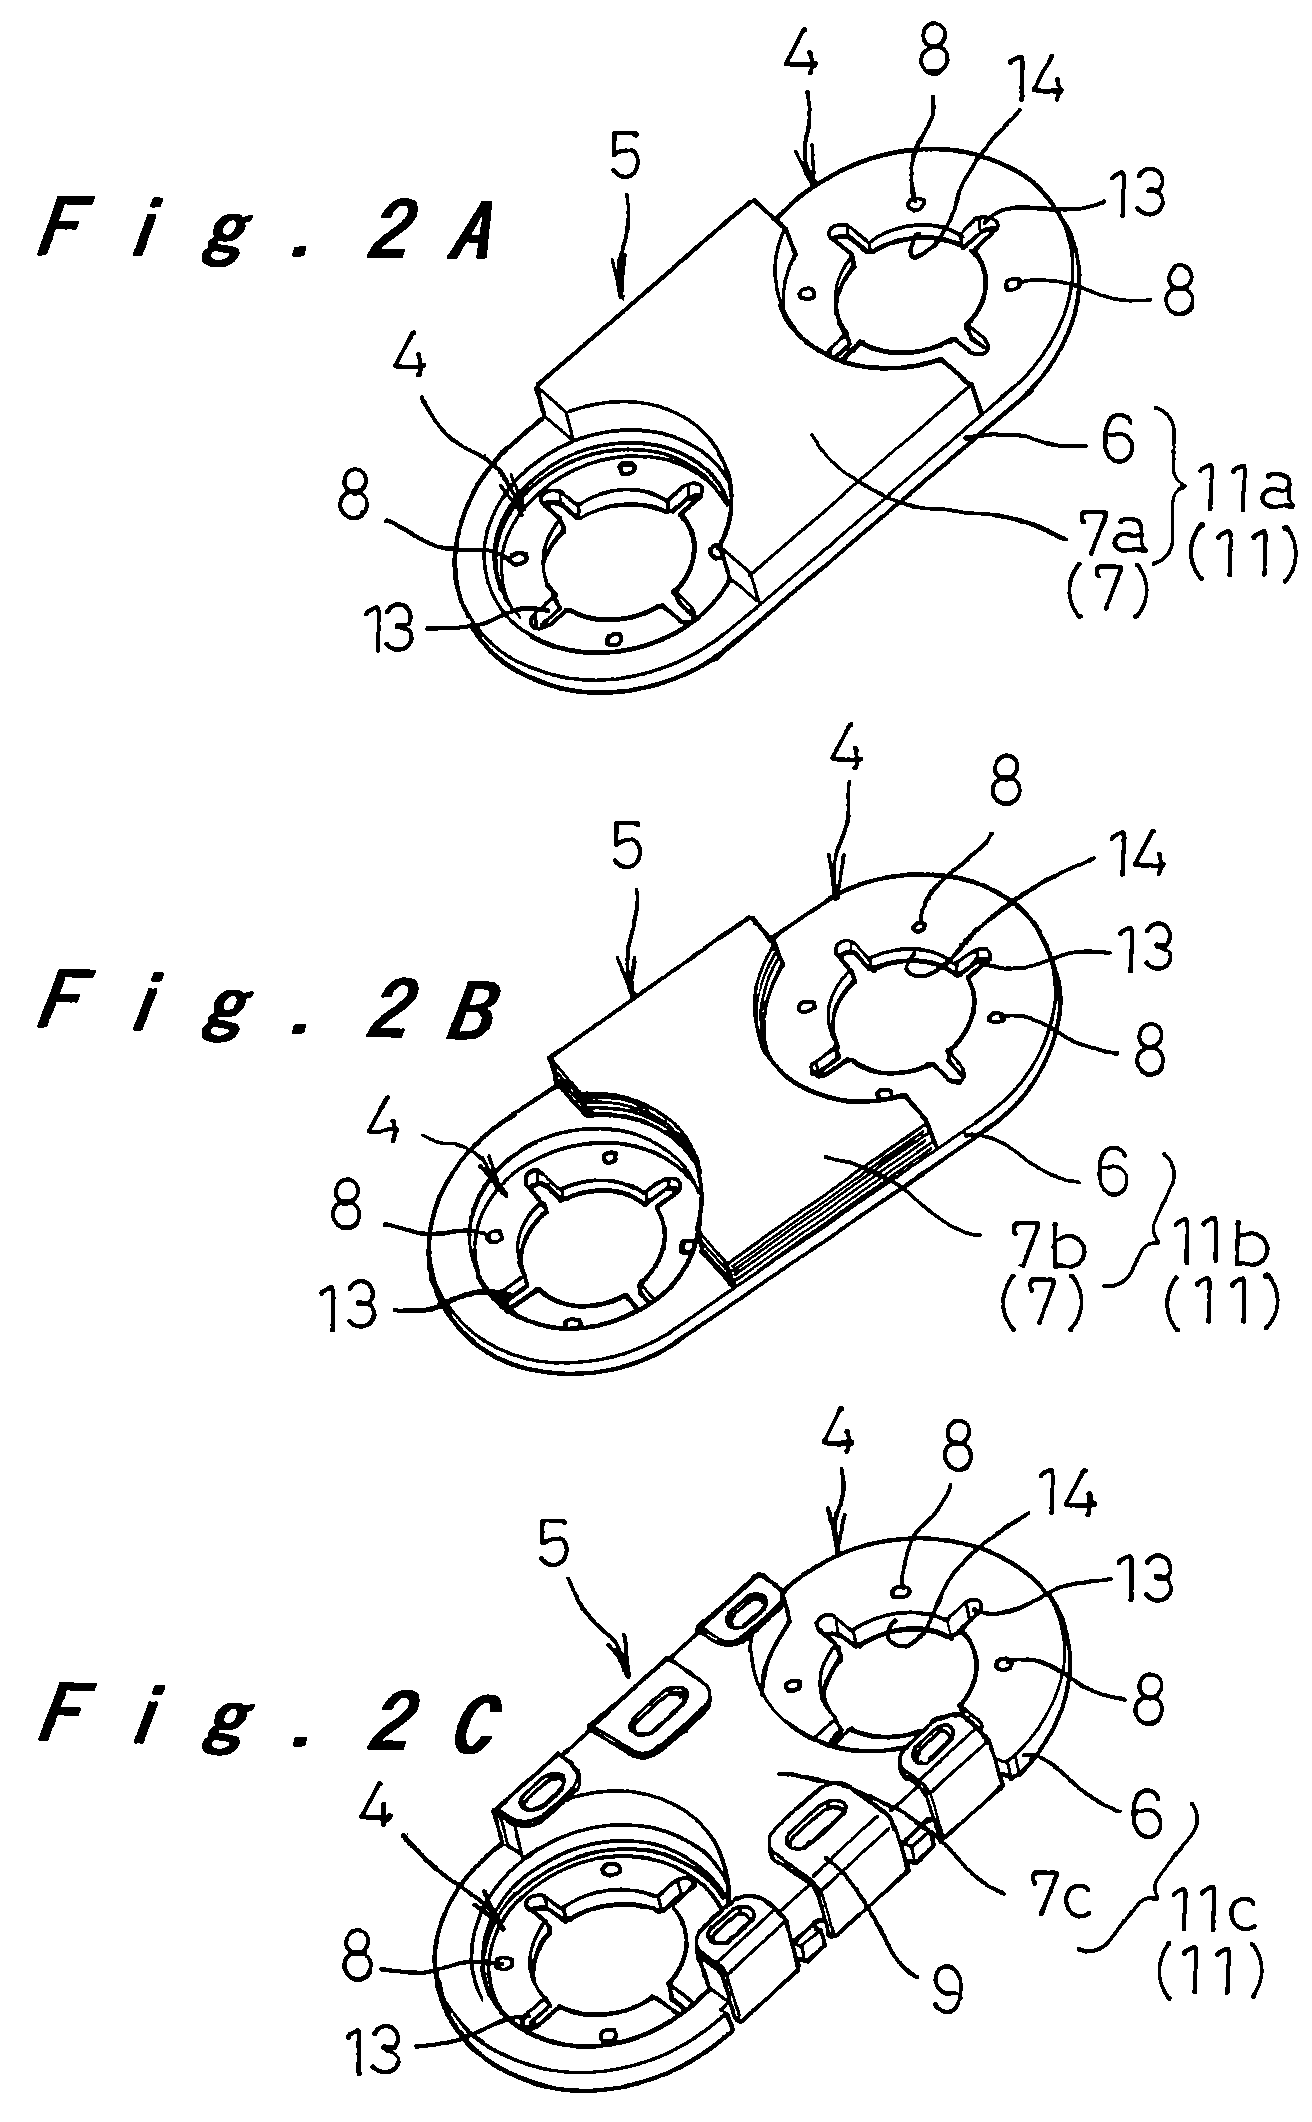 Inter-battery connection device